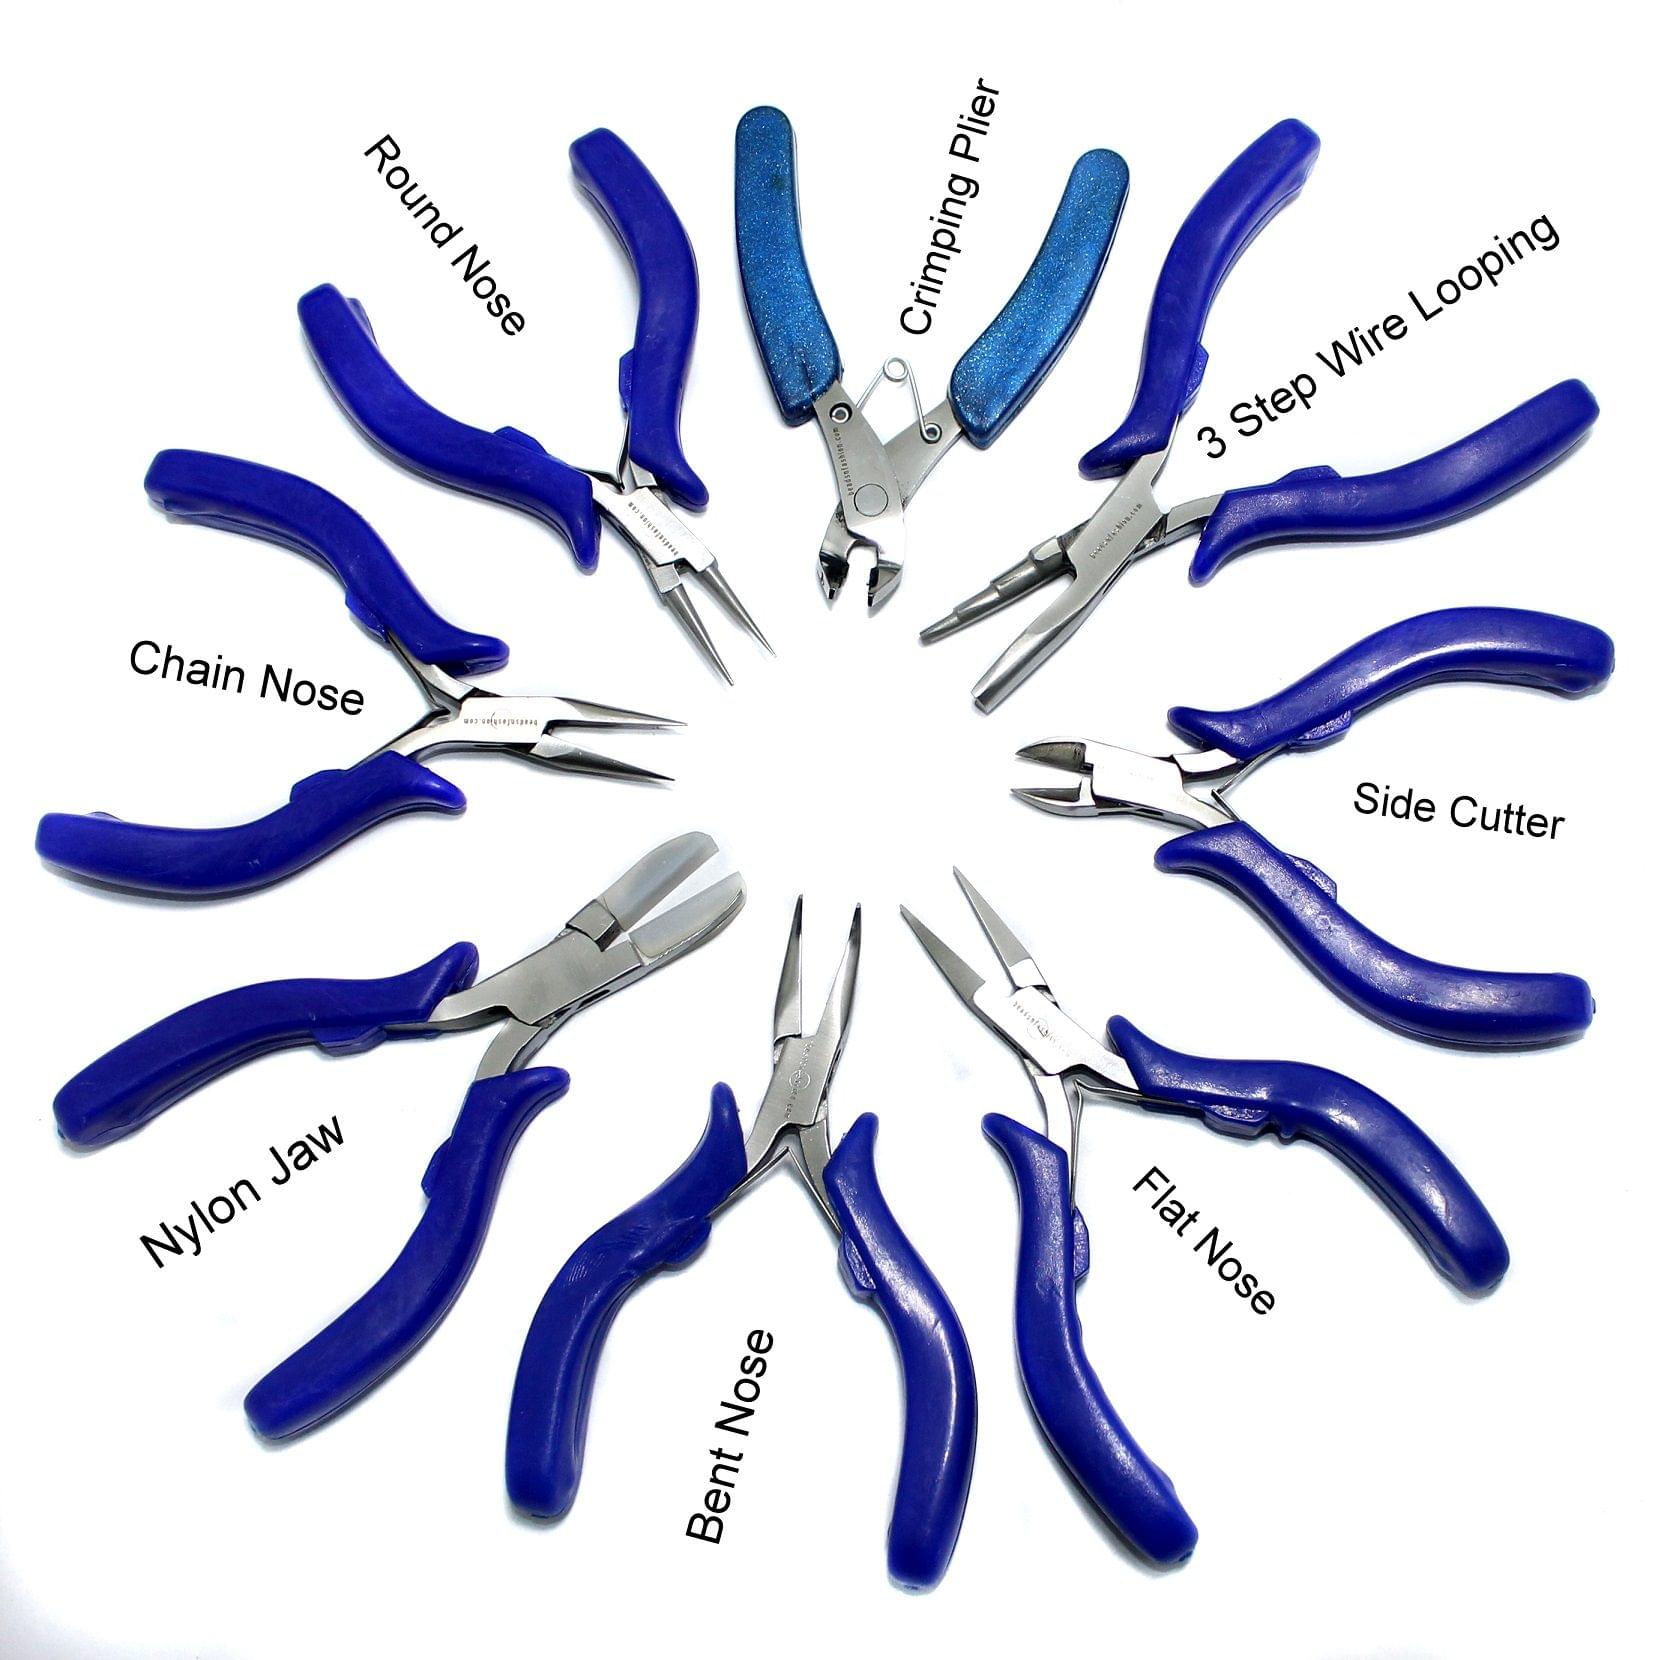 Types of pliers